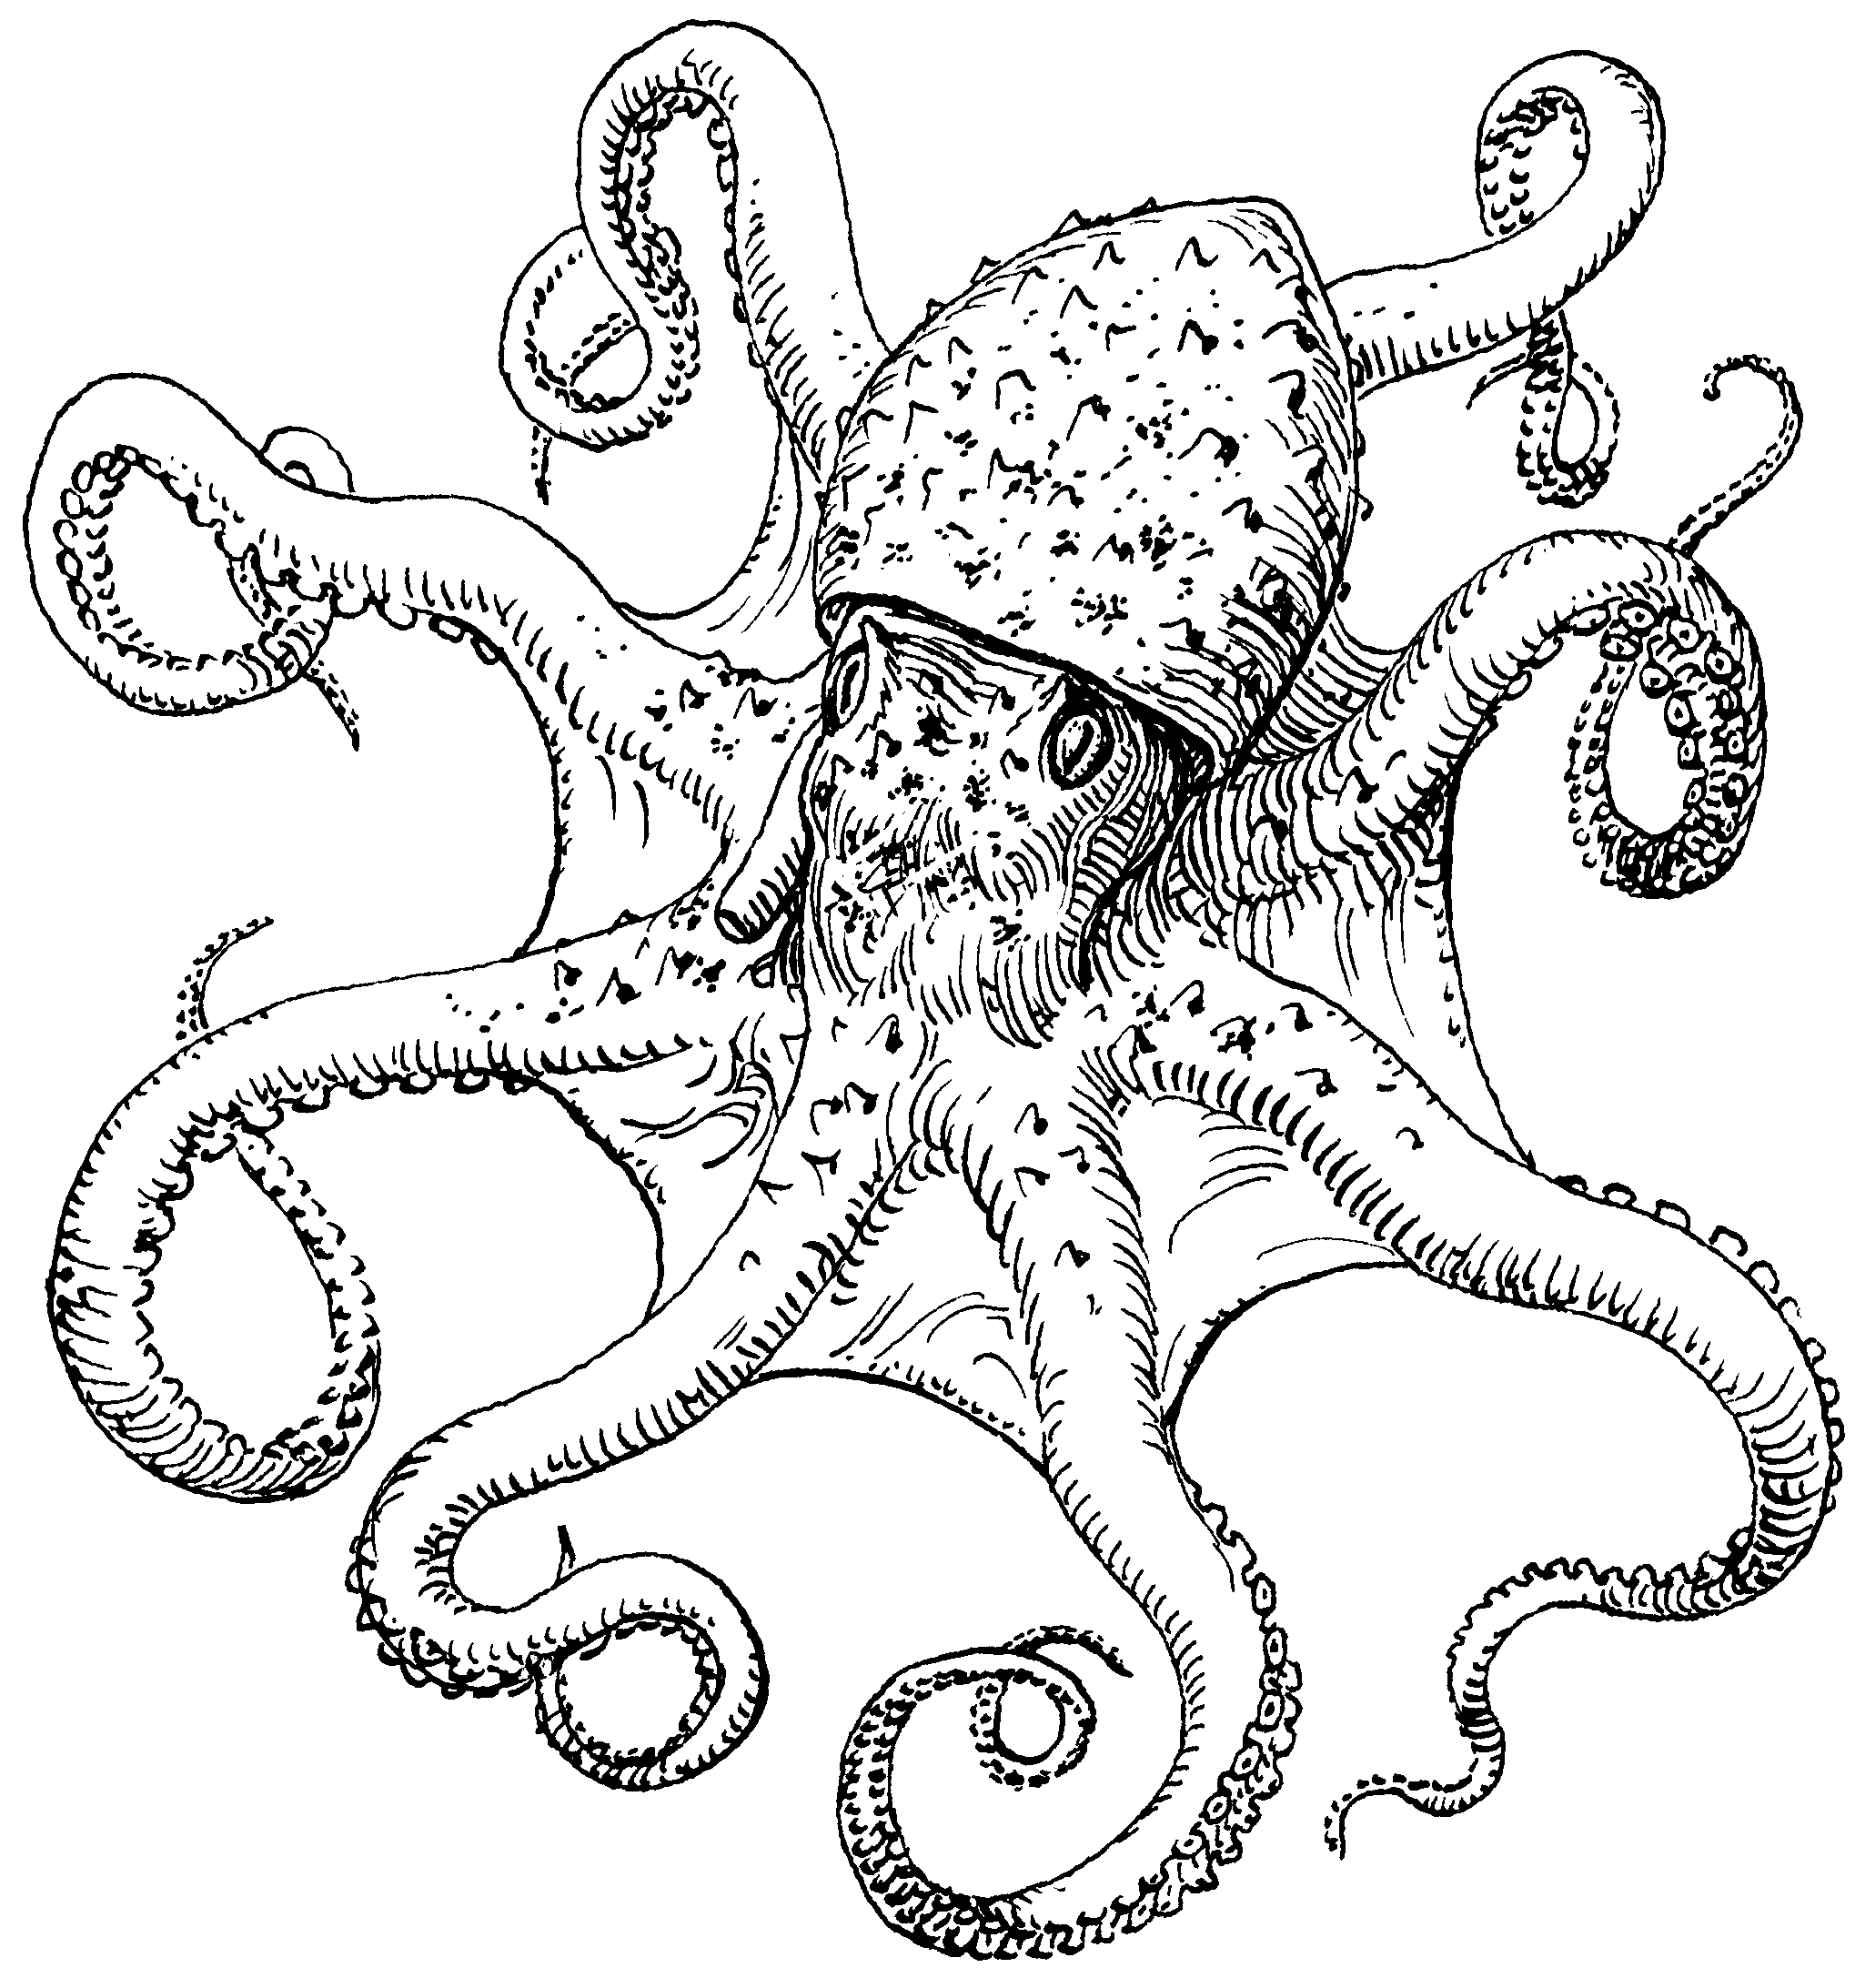 File:Octopus (PSF).png - The Work of God's Children